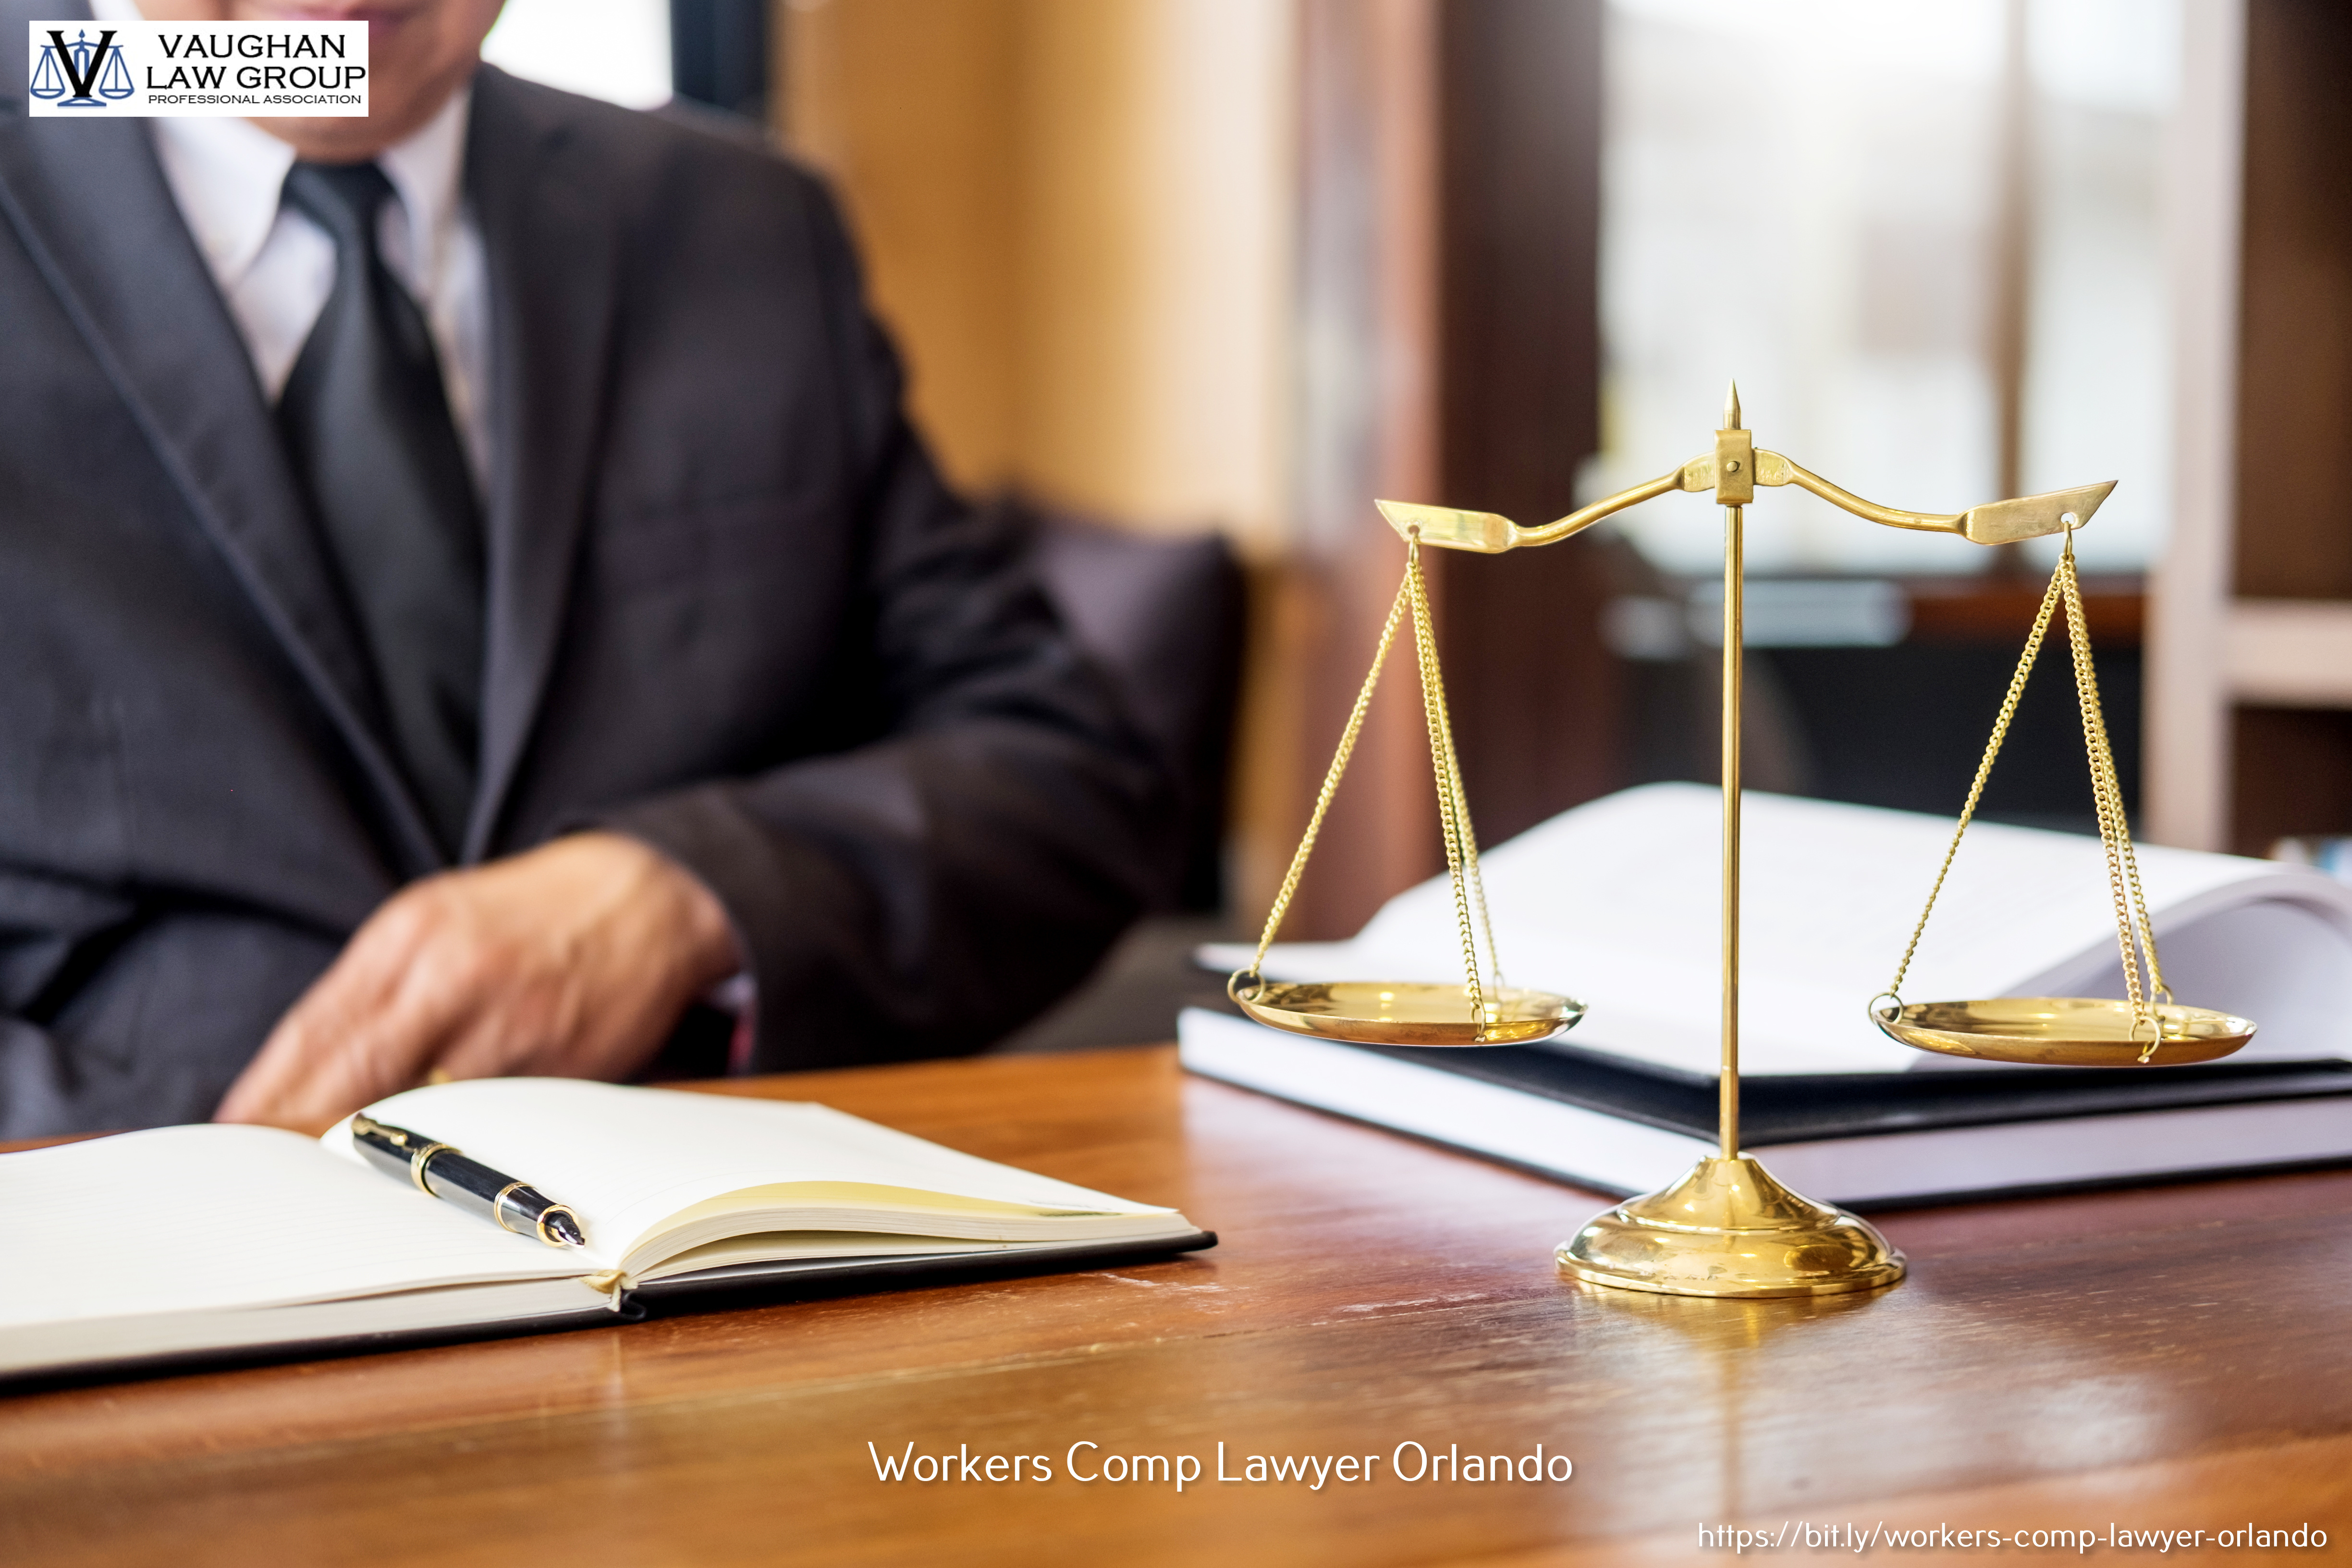 Vaughan Law Group Highlights The Mistakes That Can Harm a Workers’ Compensation Claim